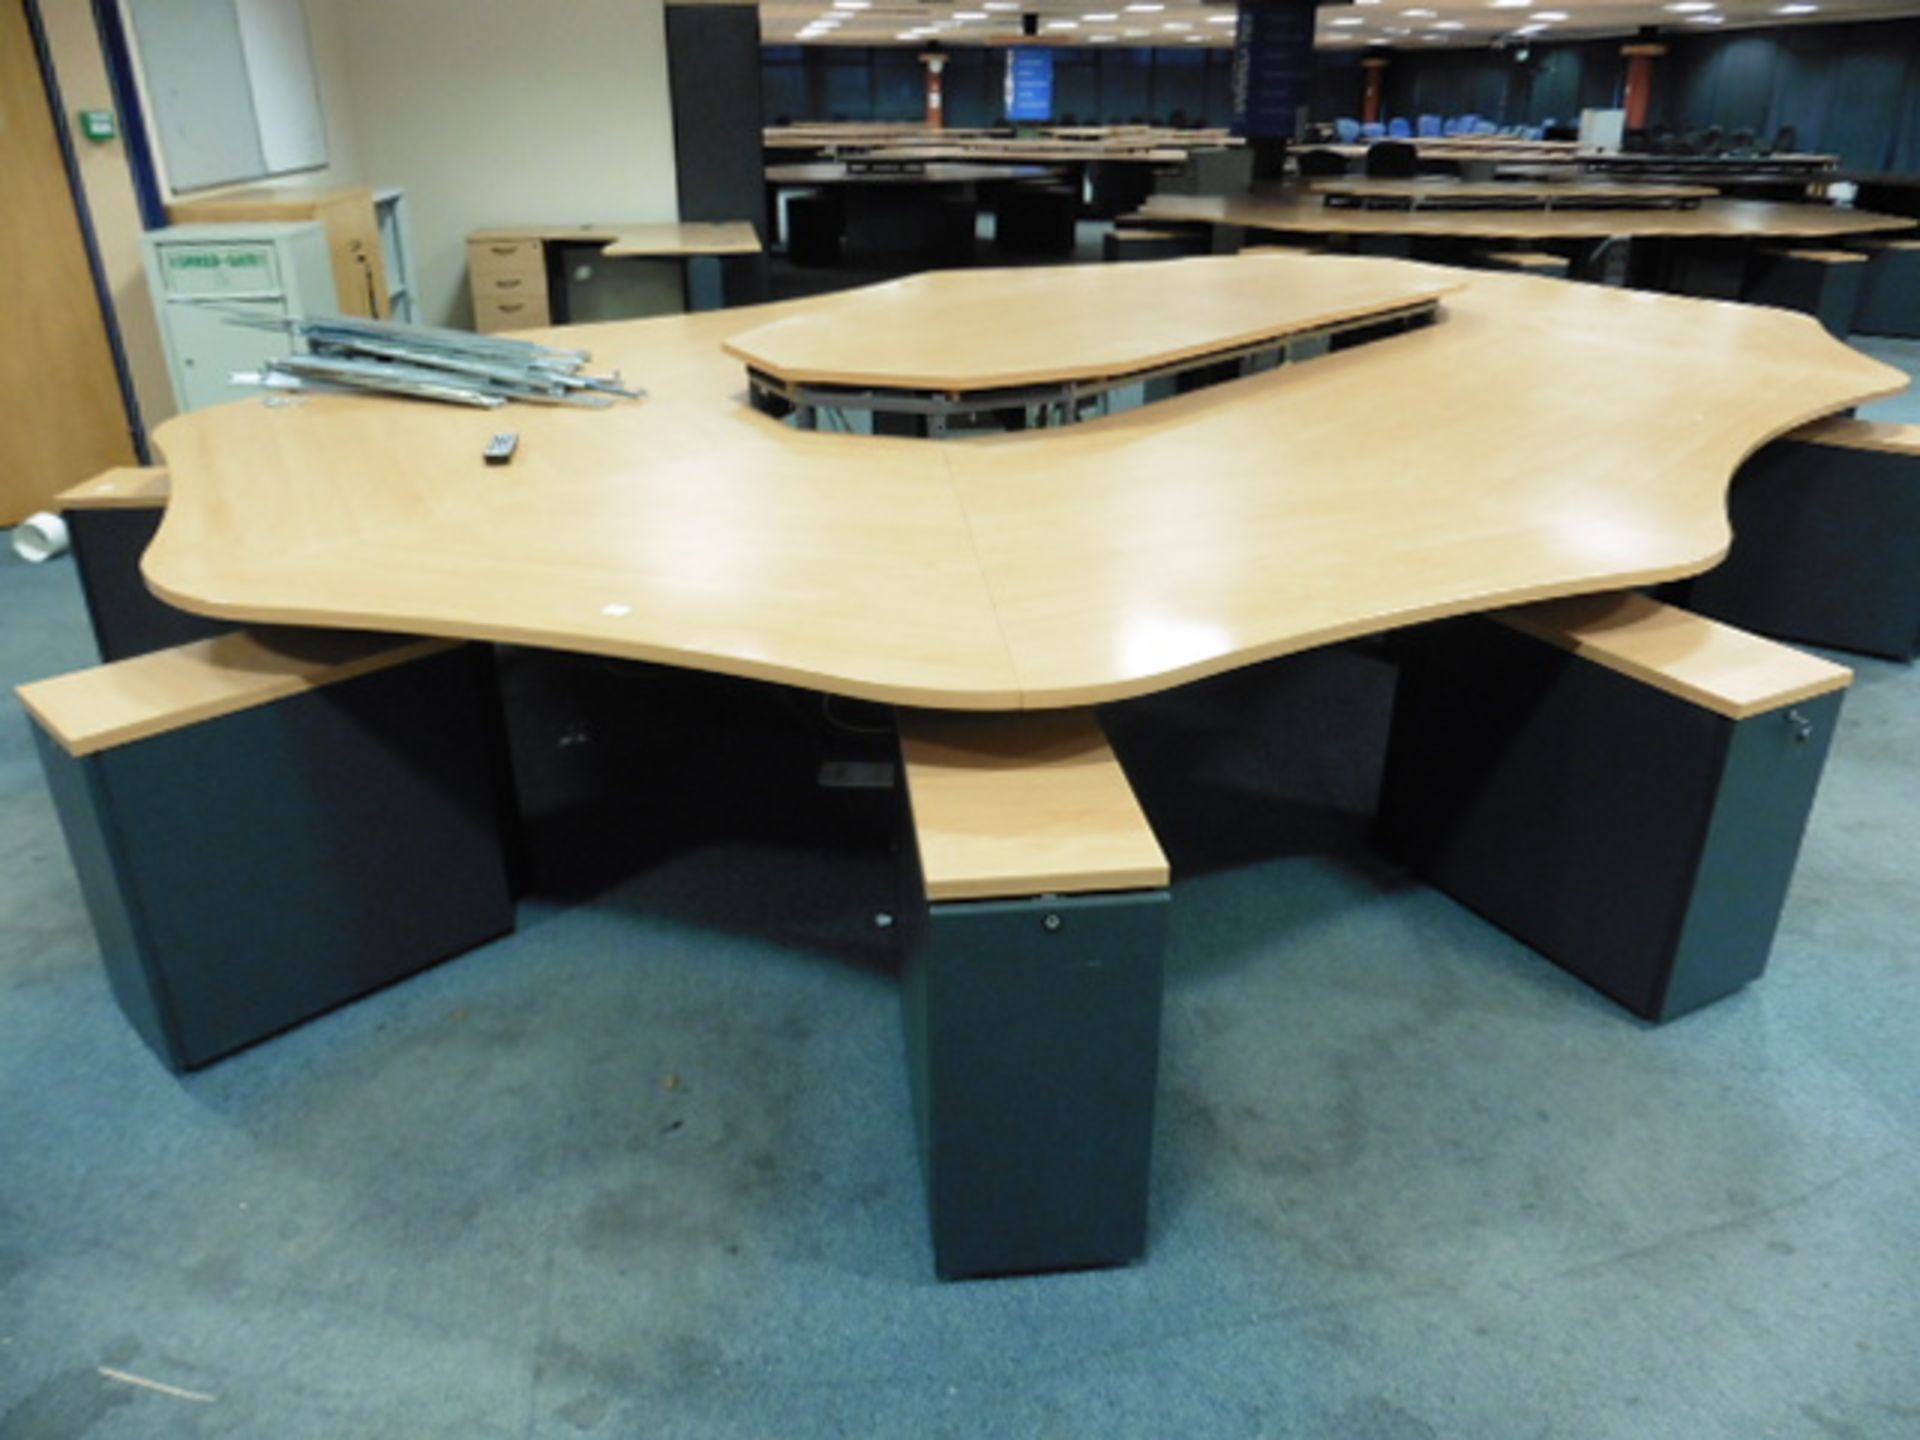 Call centre 10 station modular desk pod finished in beech and grey, comes with 10 free standing